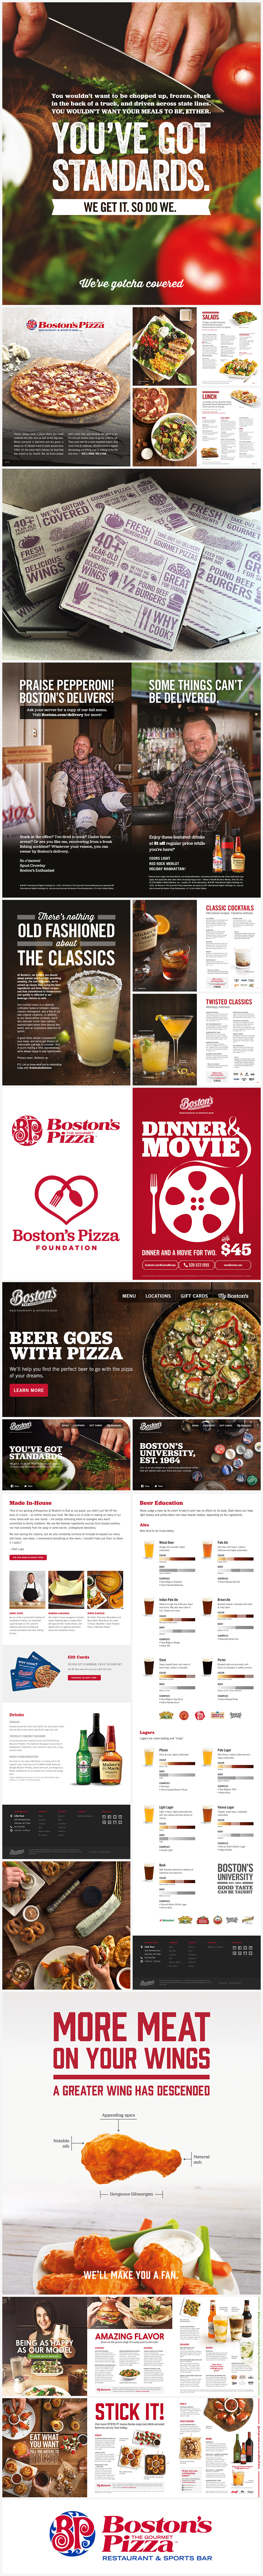 Examples of marketing collateral for Boston's Pizza